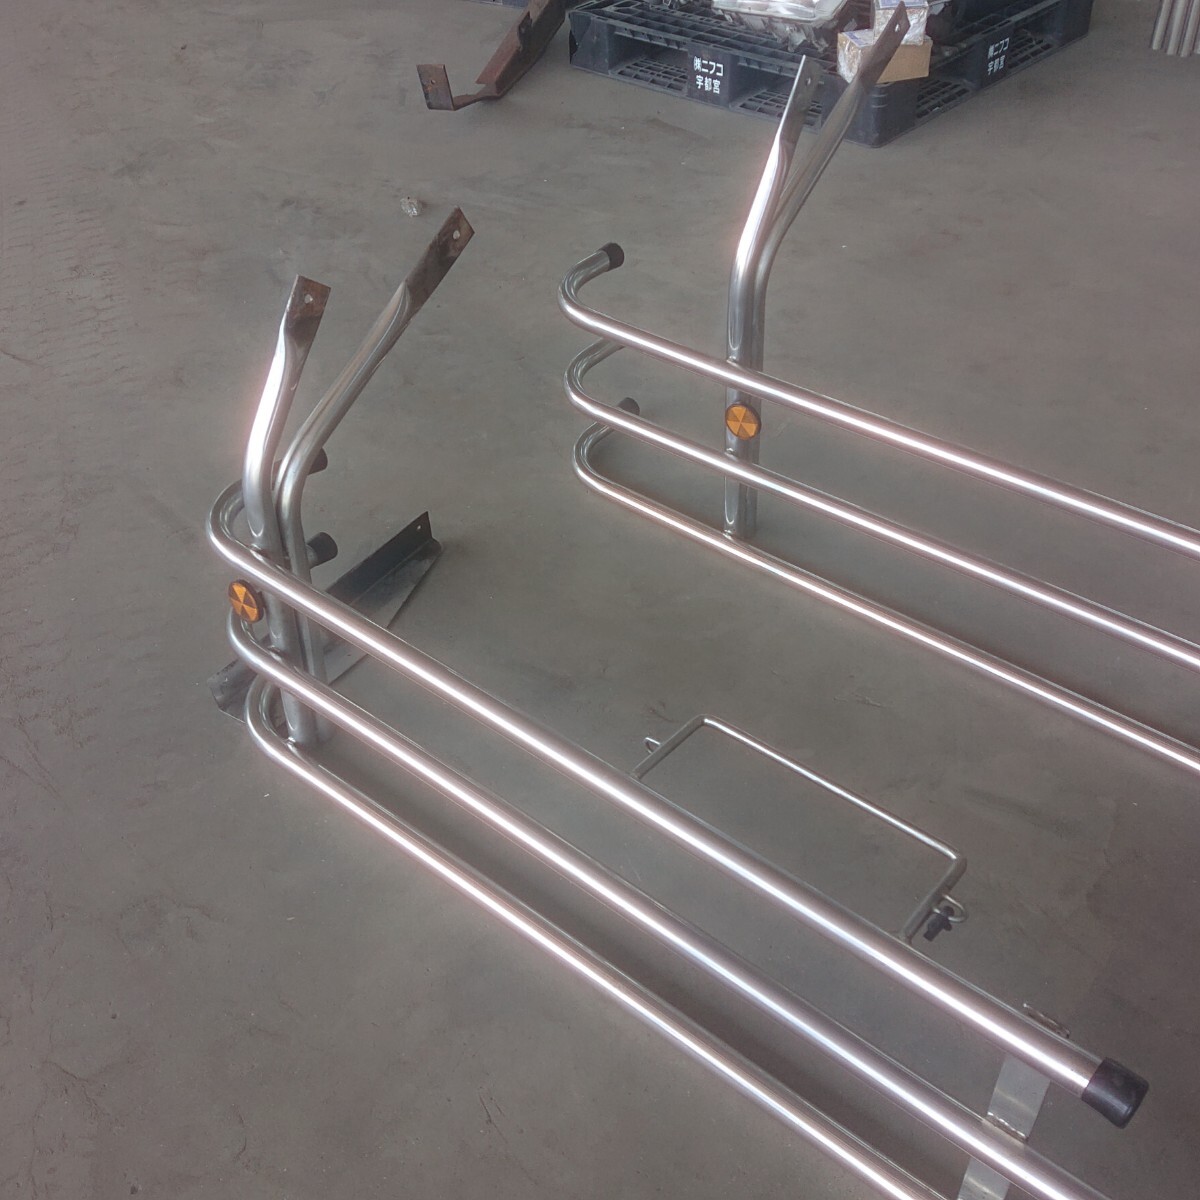  stainless steel side bumper 4 axis low floor length 2970 millimeter A0425-6-6